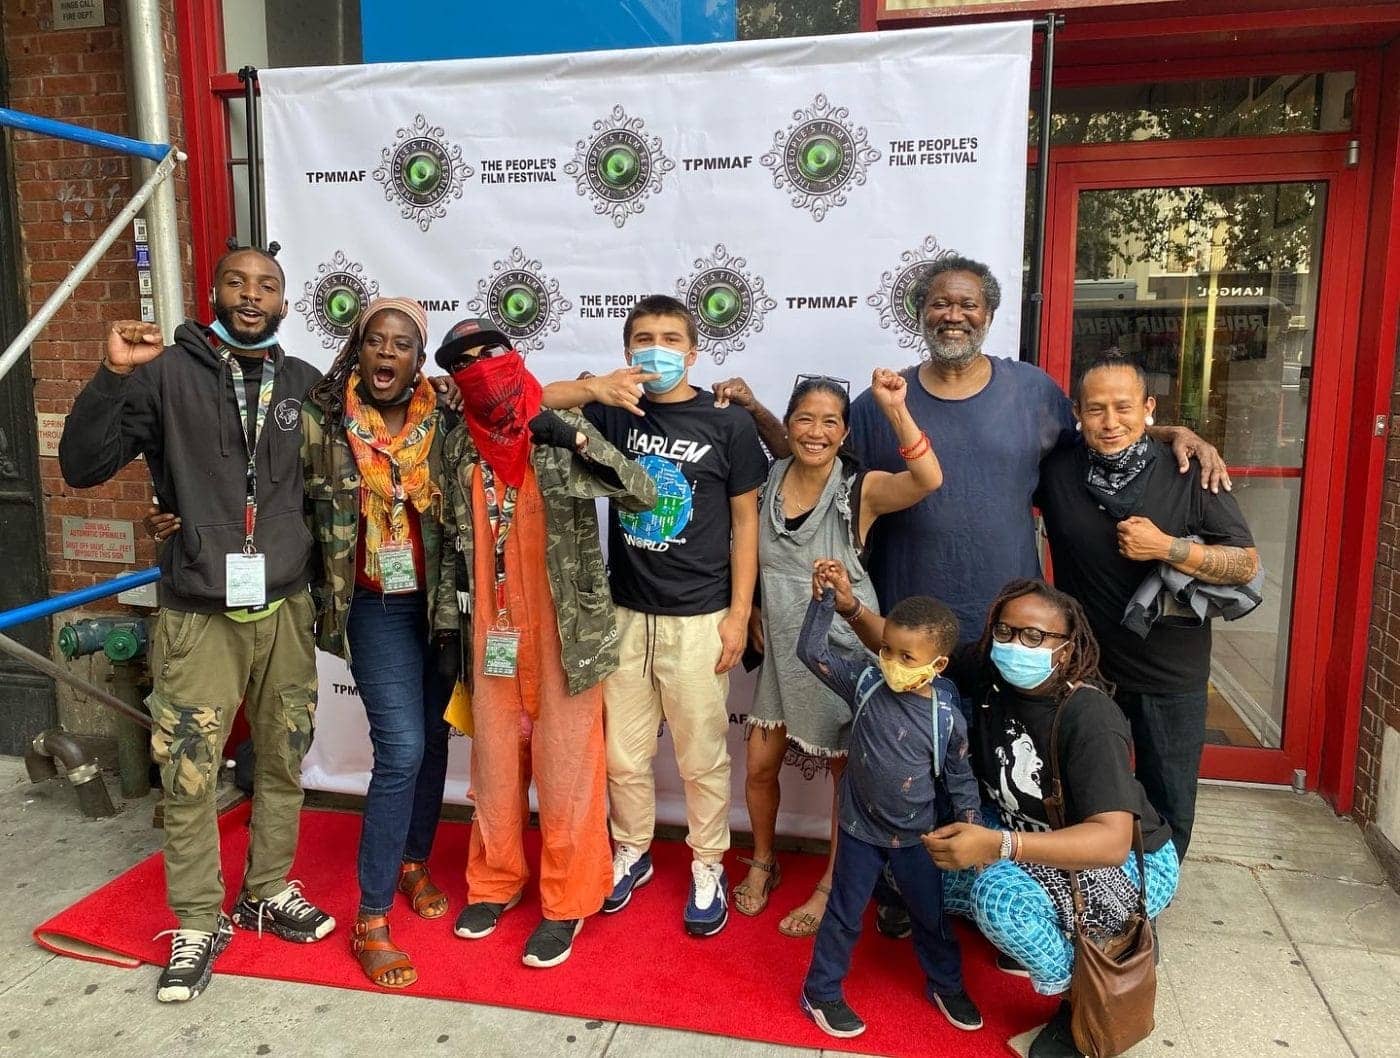 Harlem-movie-premiere-POOR-Magazine-1400x1058, Academic colonization and the UnHoused Nation, Culture Currents News & Views 